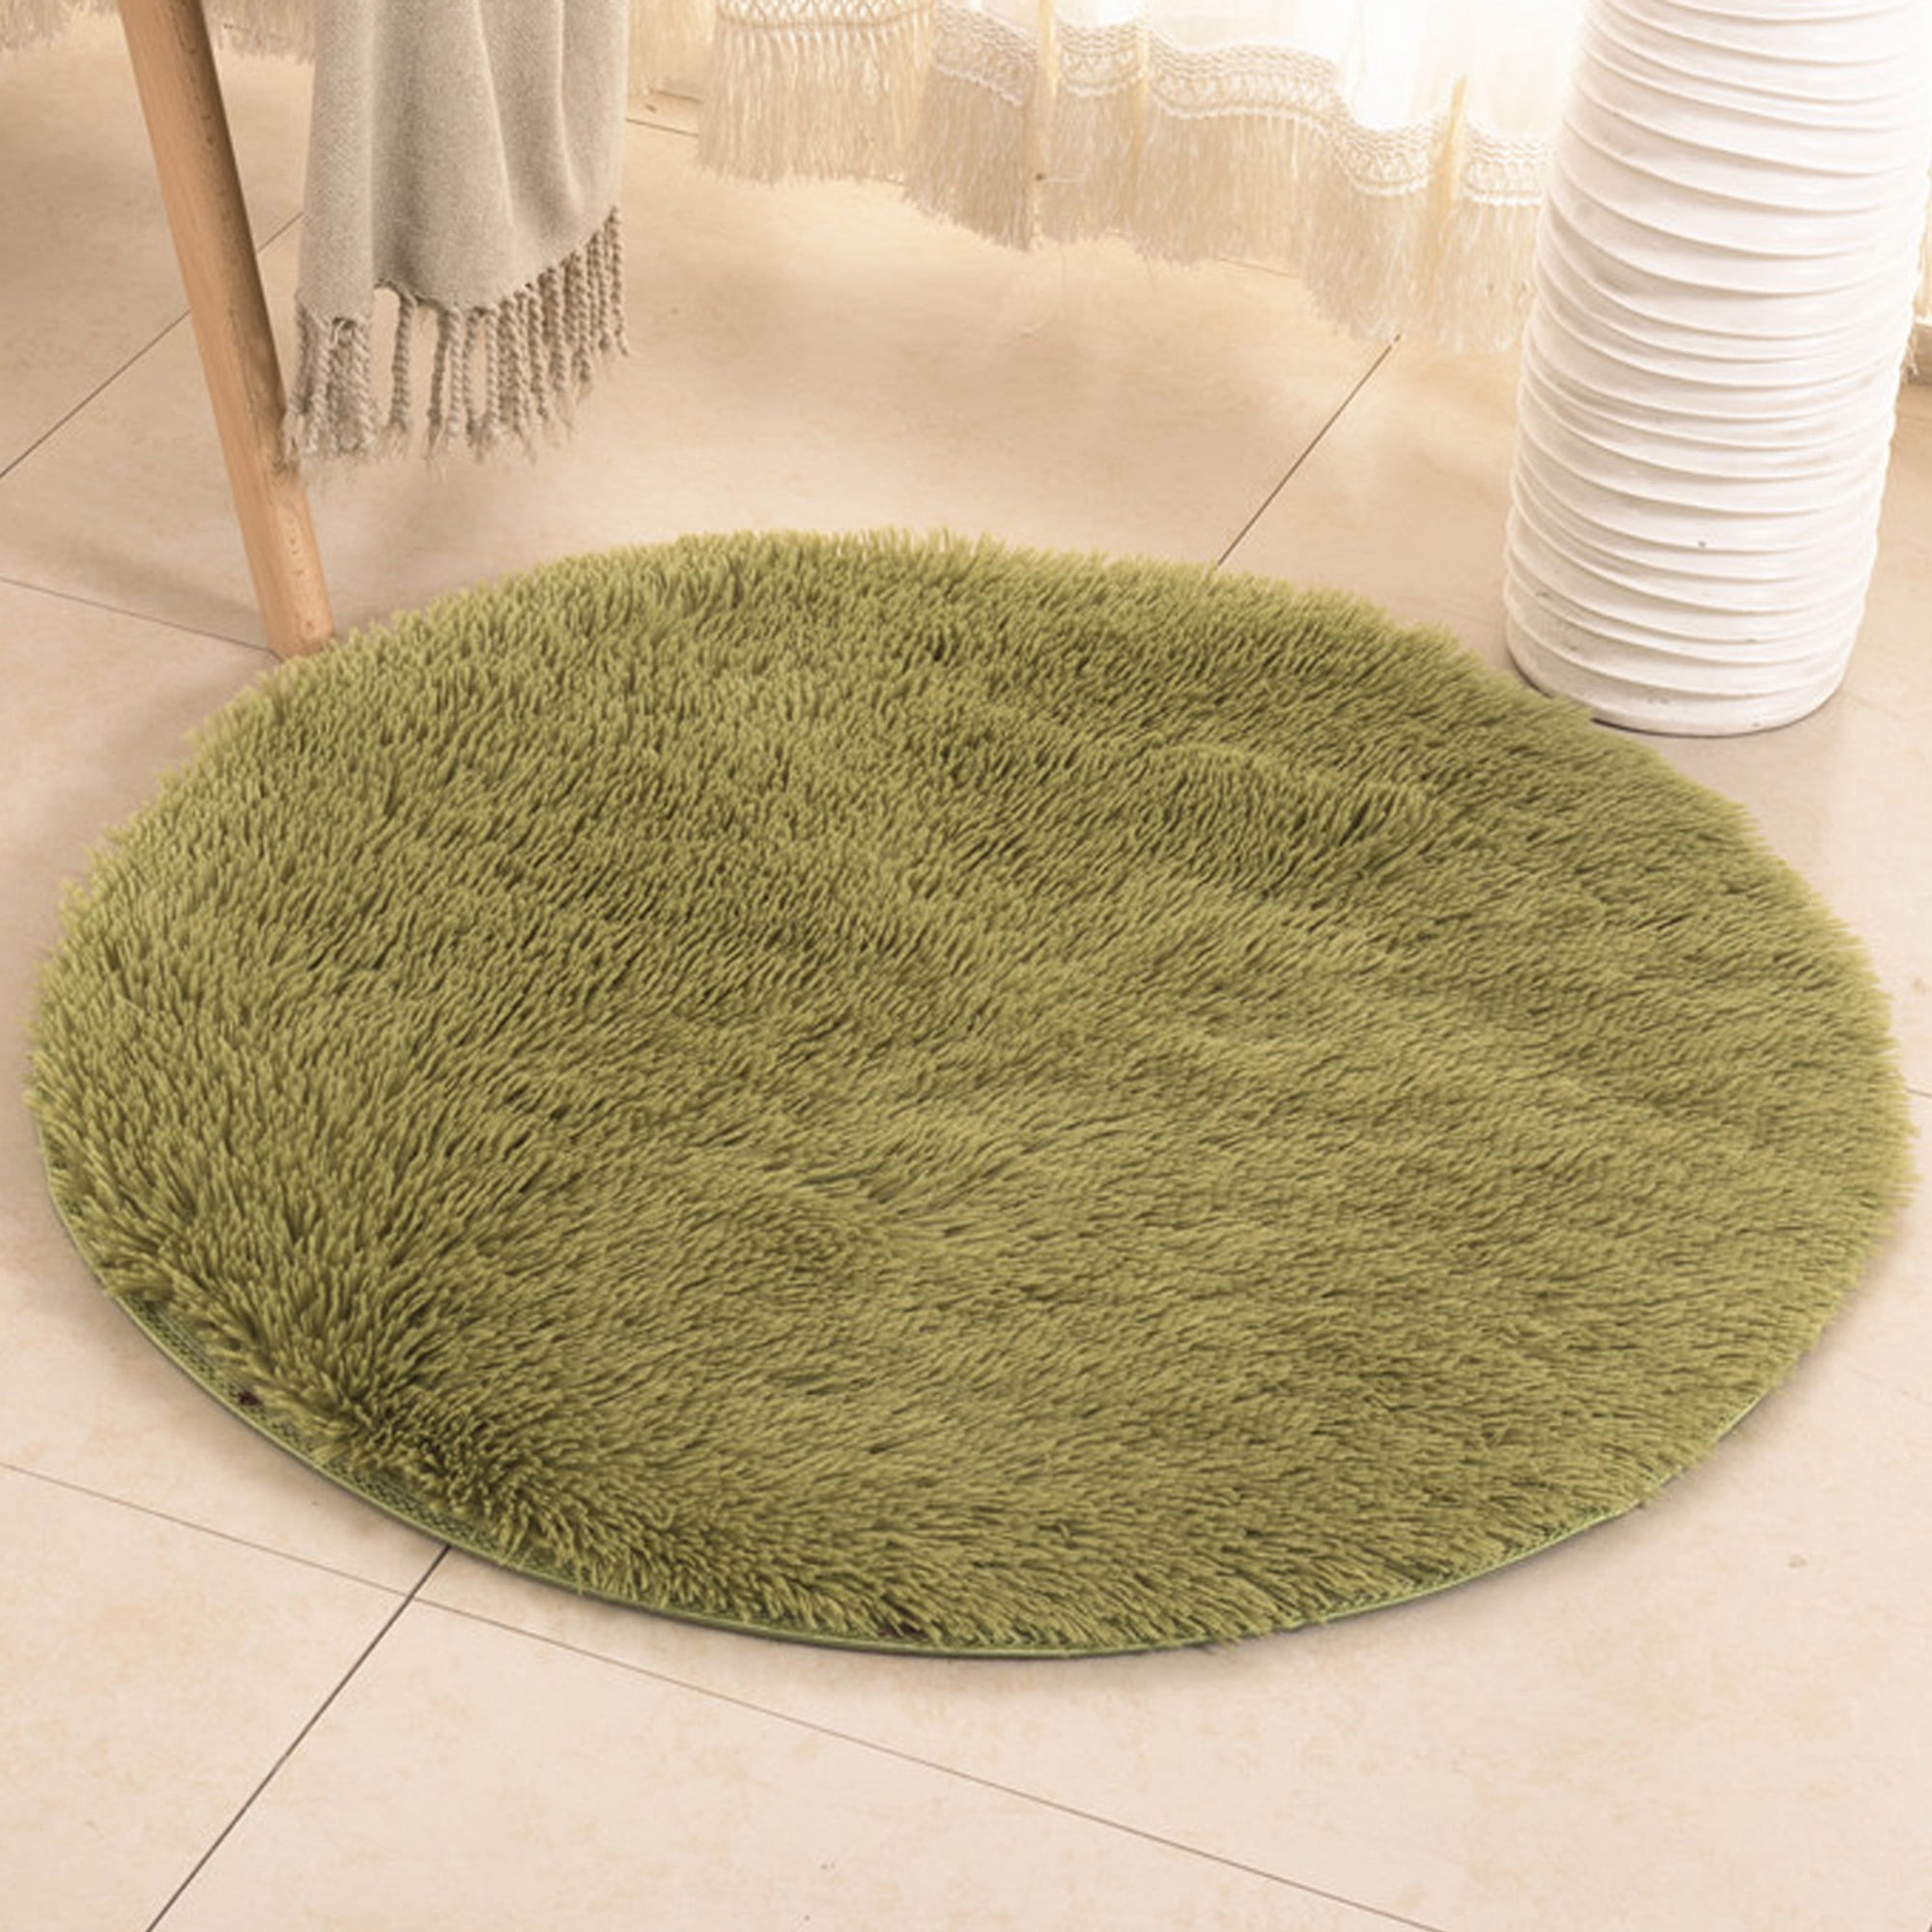 24 x 24 Inch Circle Non Slip Coral Velvet Area Rug Tropical Garden with PineWashable Carpet Home Decor Floor Rugs for Living Room Nursery Kids Bedroom 